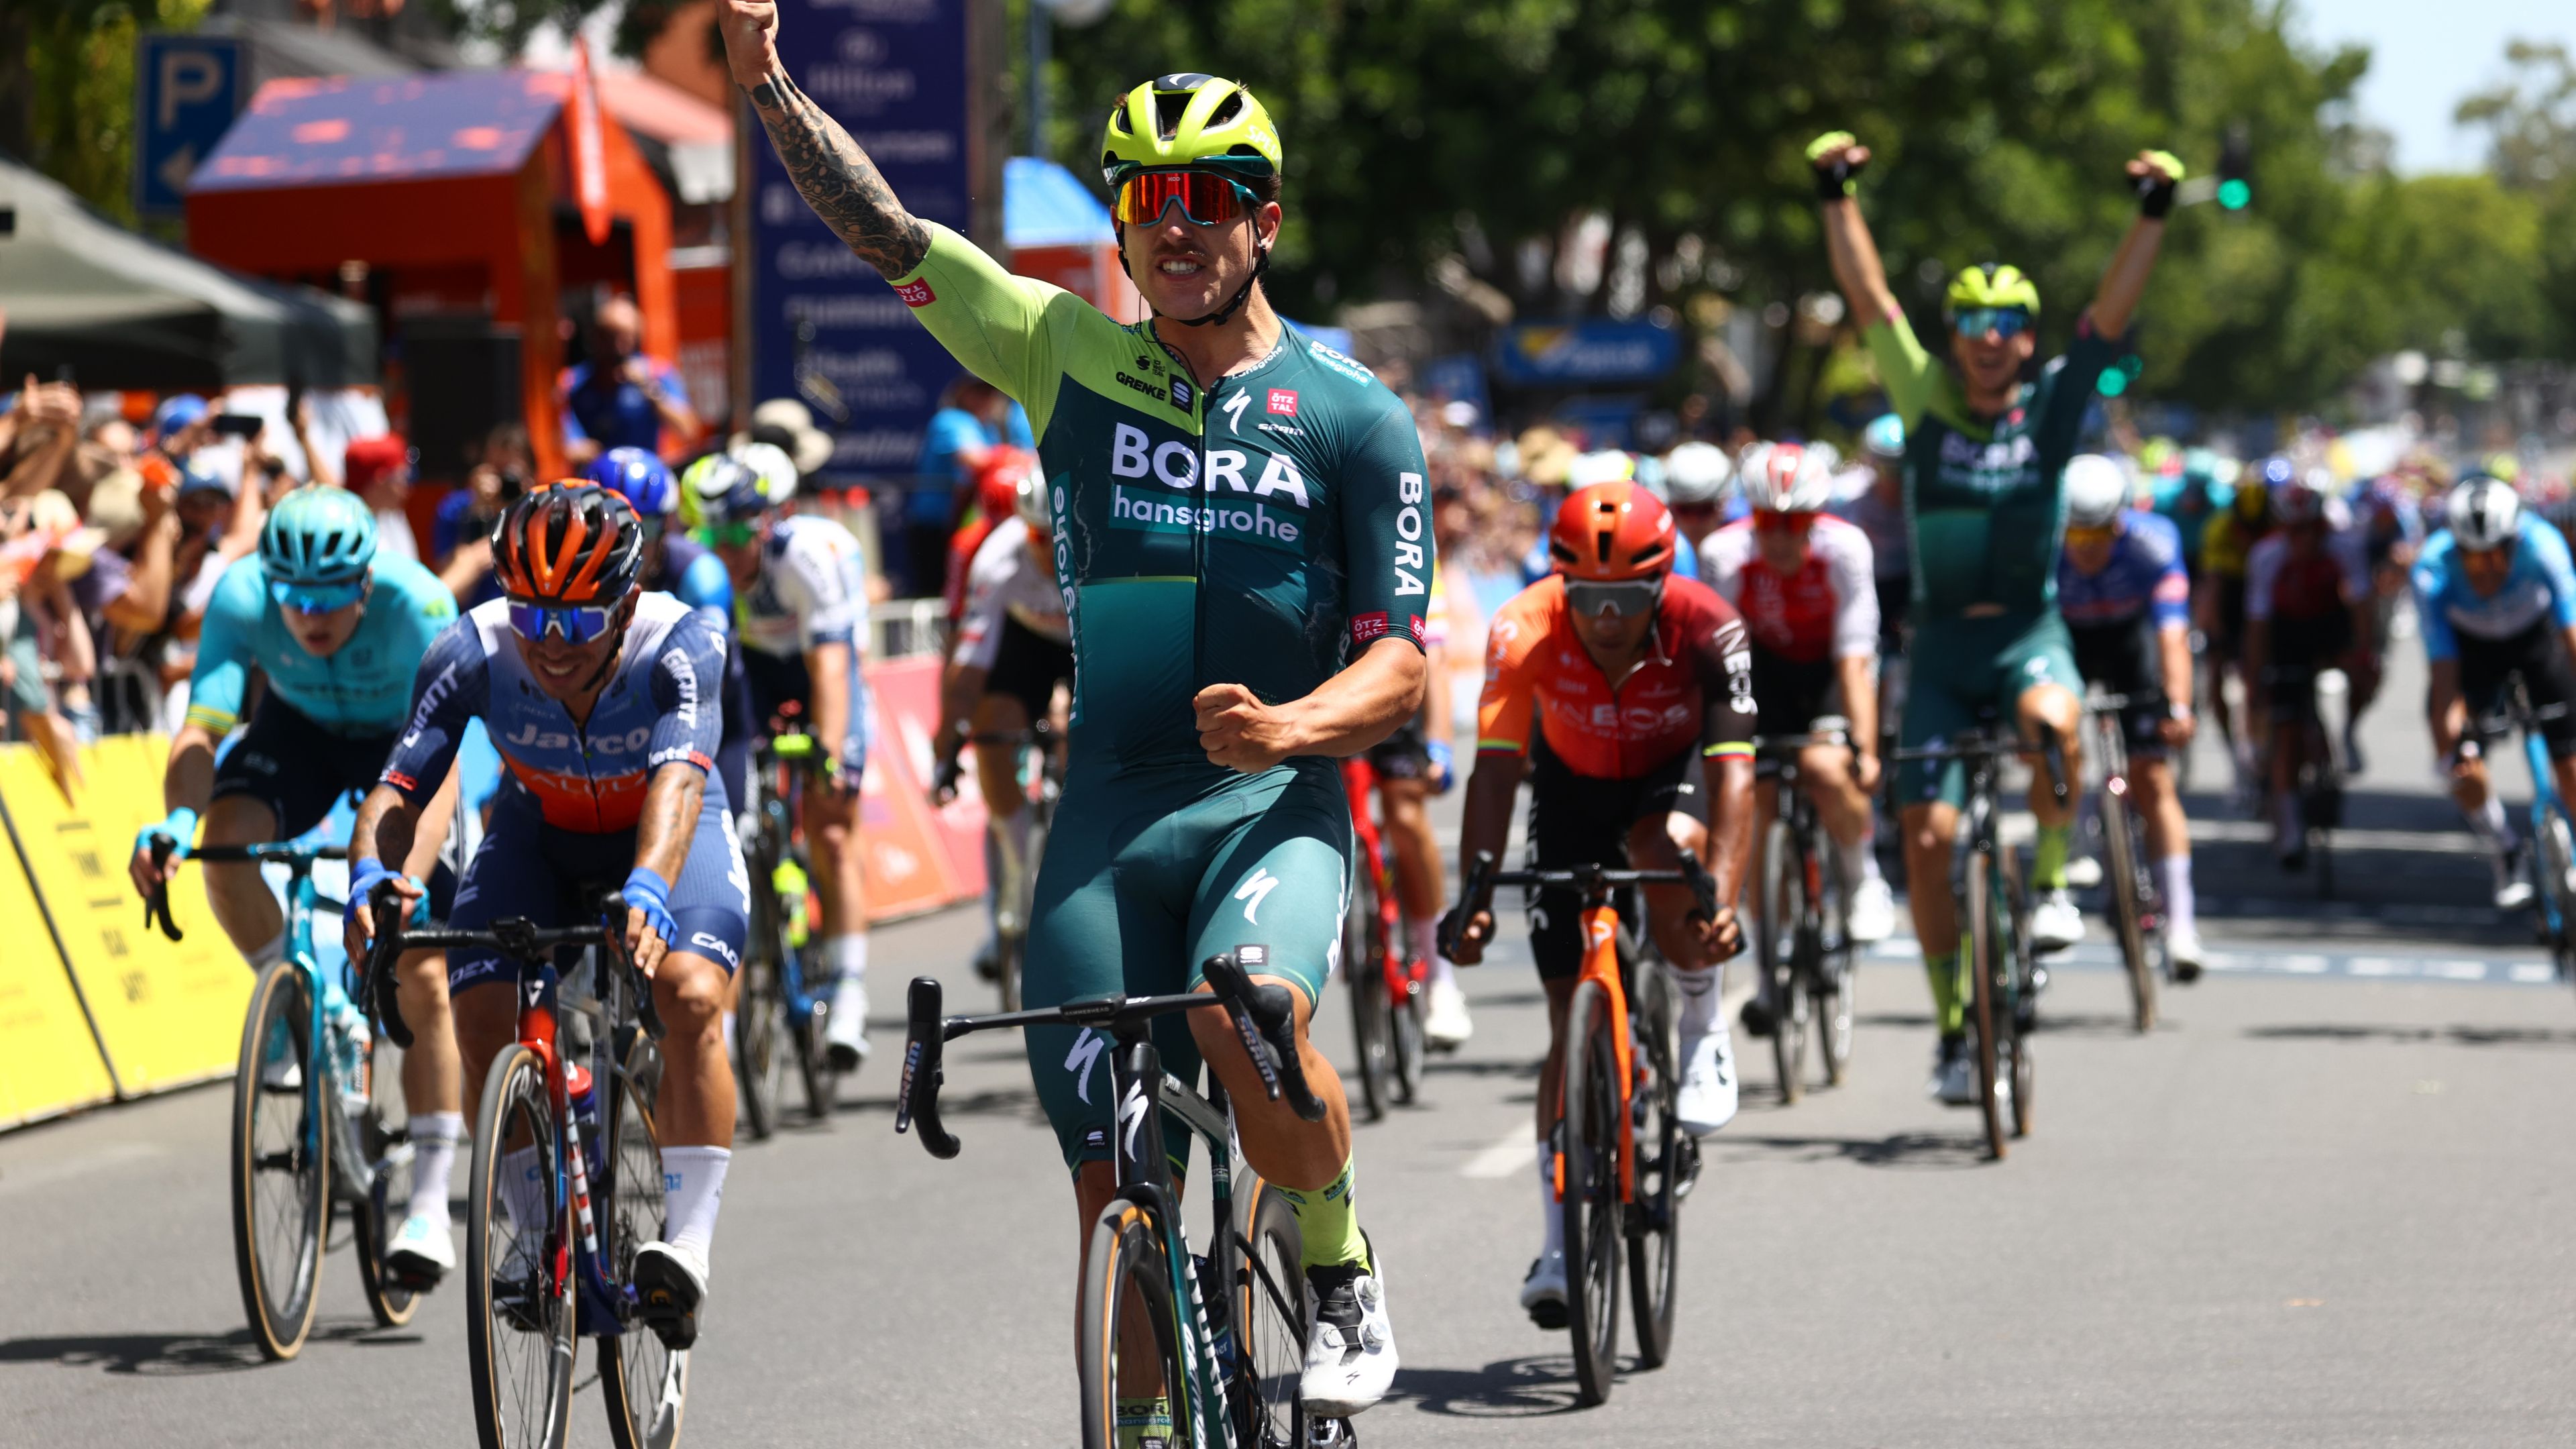 Sam Welsford of Australia and Bora-Hansgrohe team wins the 24th Santos Tour Down Under Stage 1.